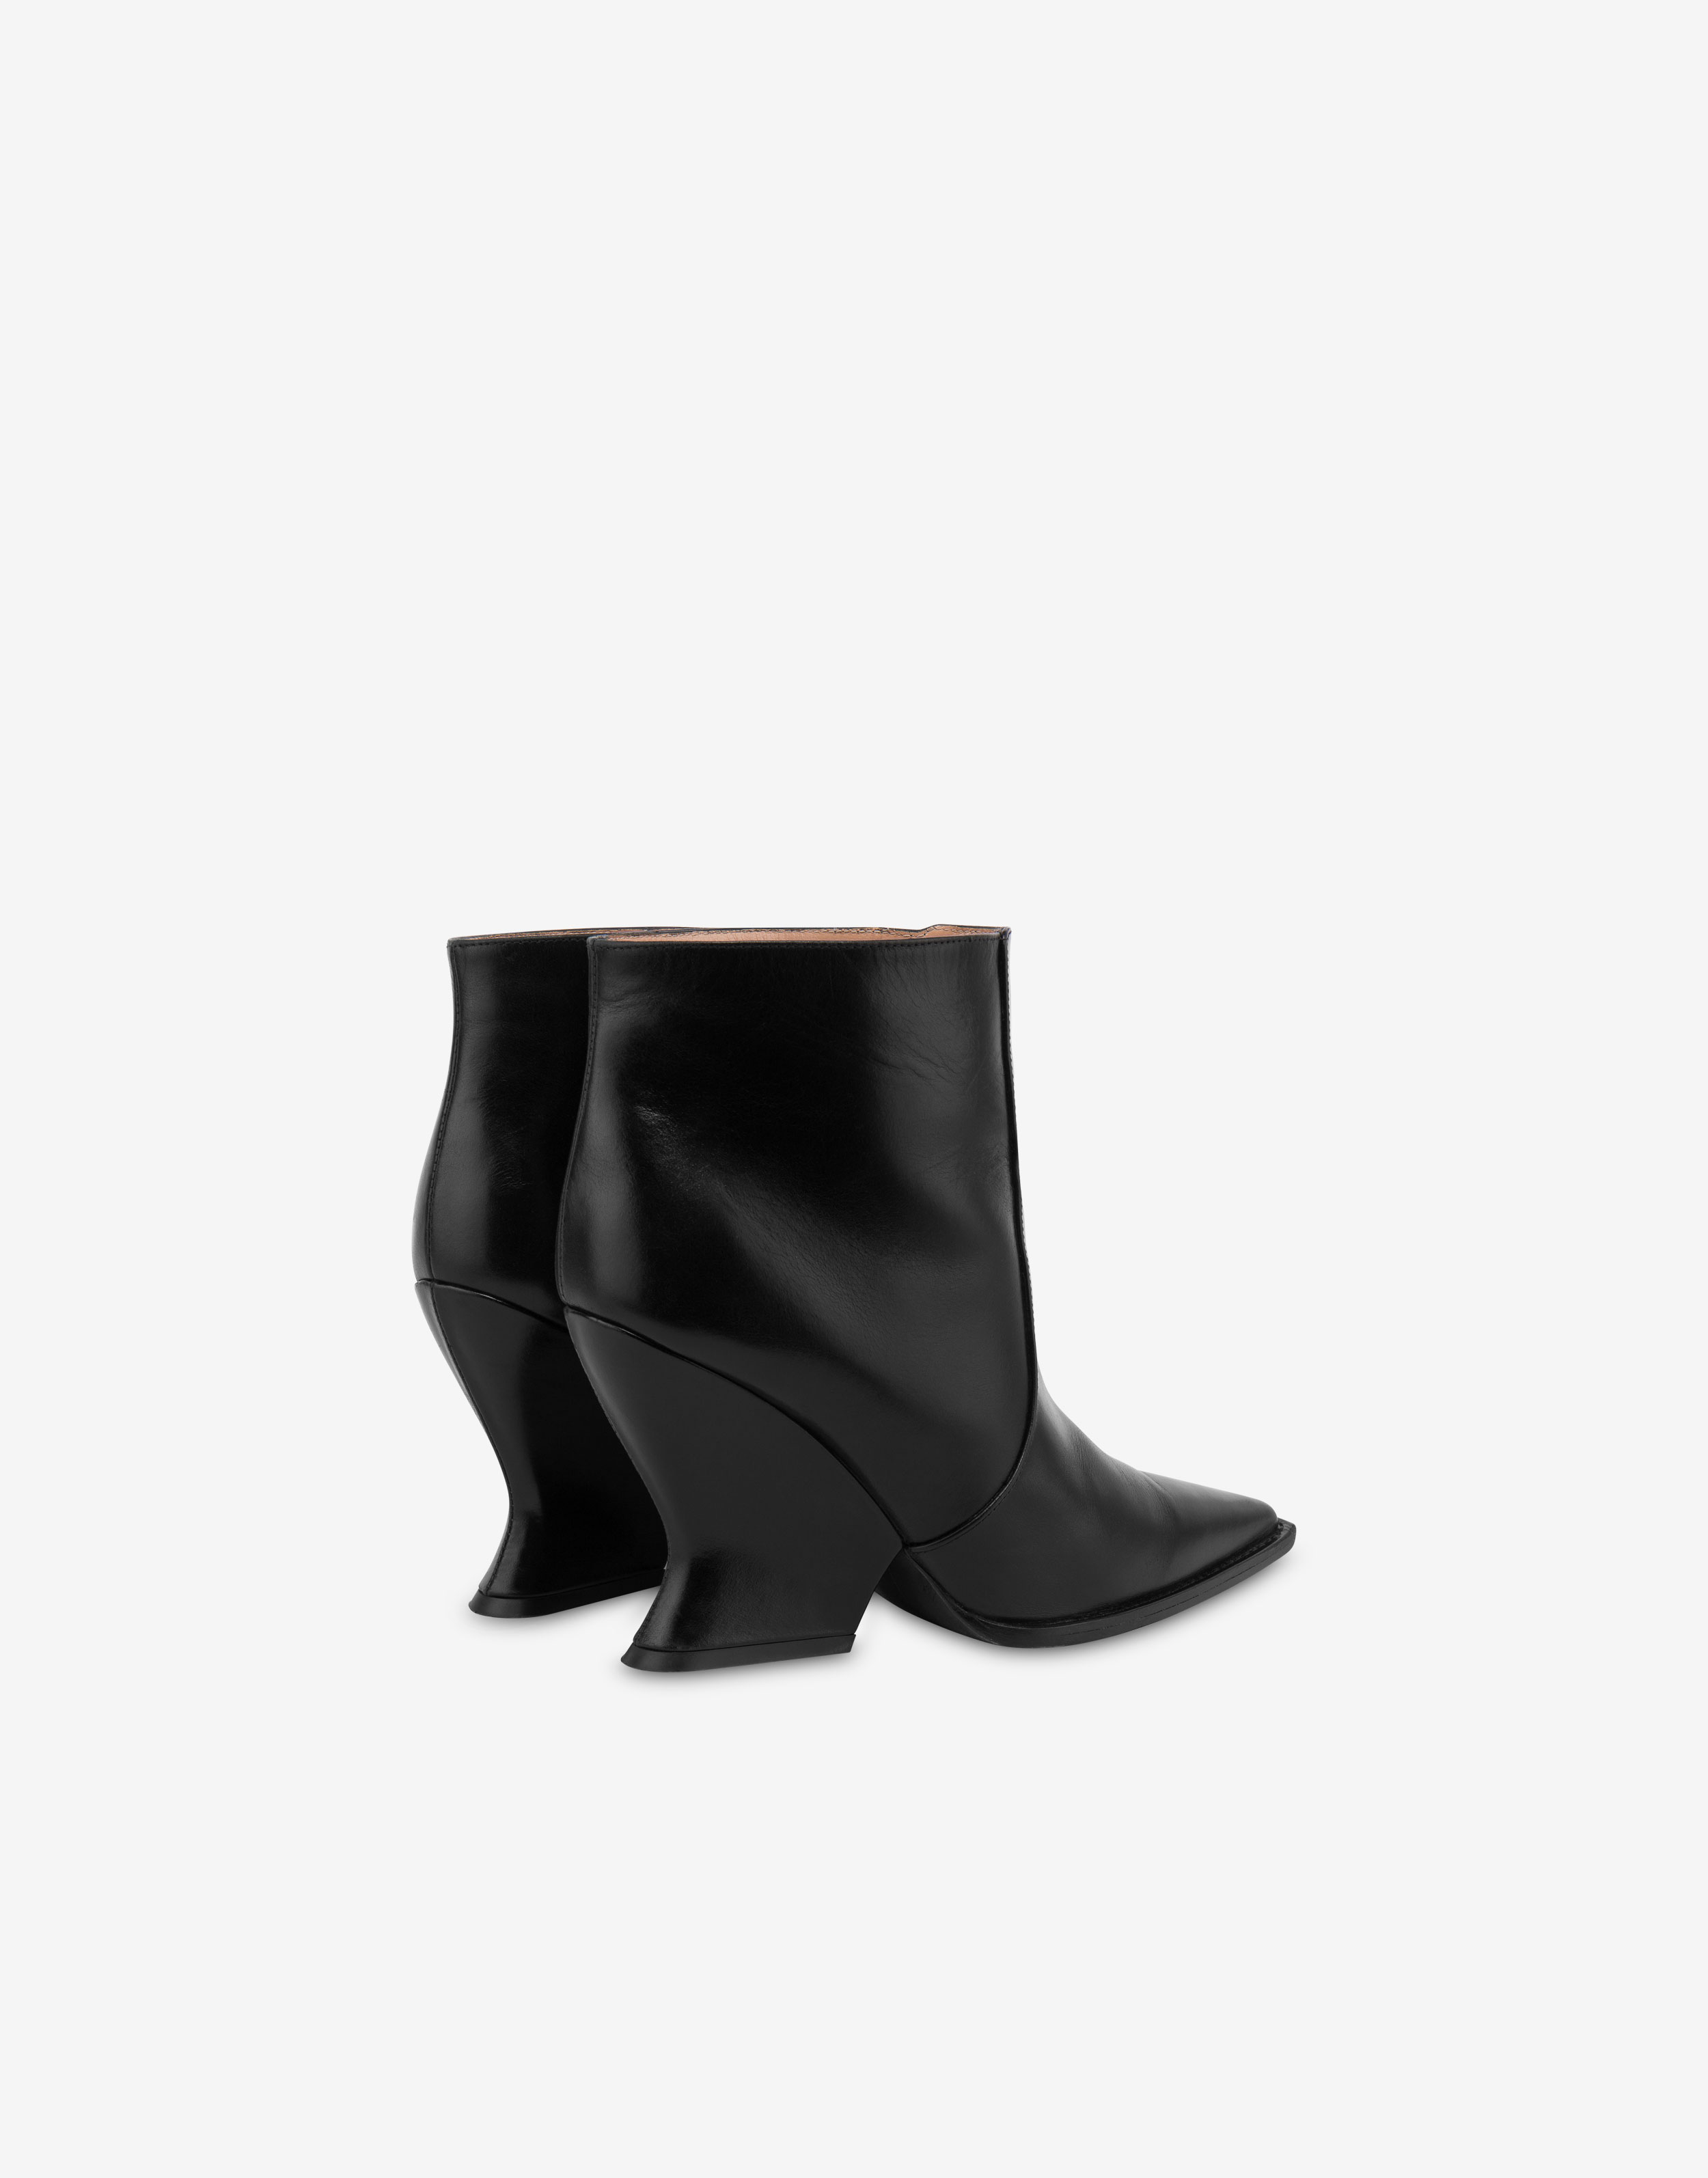 Walking calf leather ankle boots